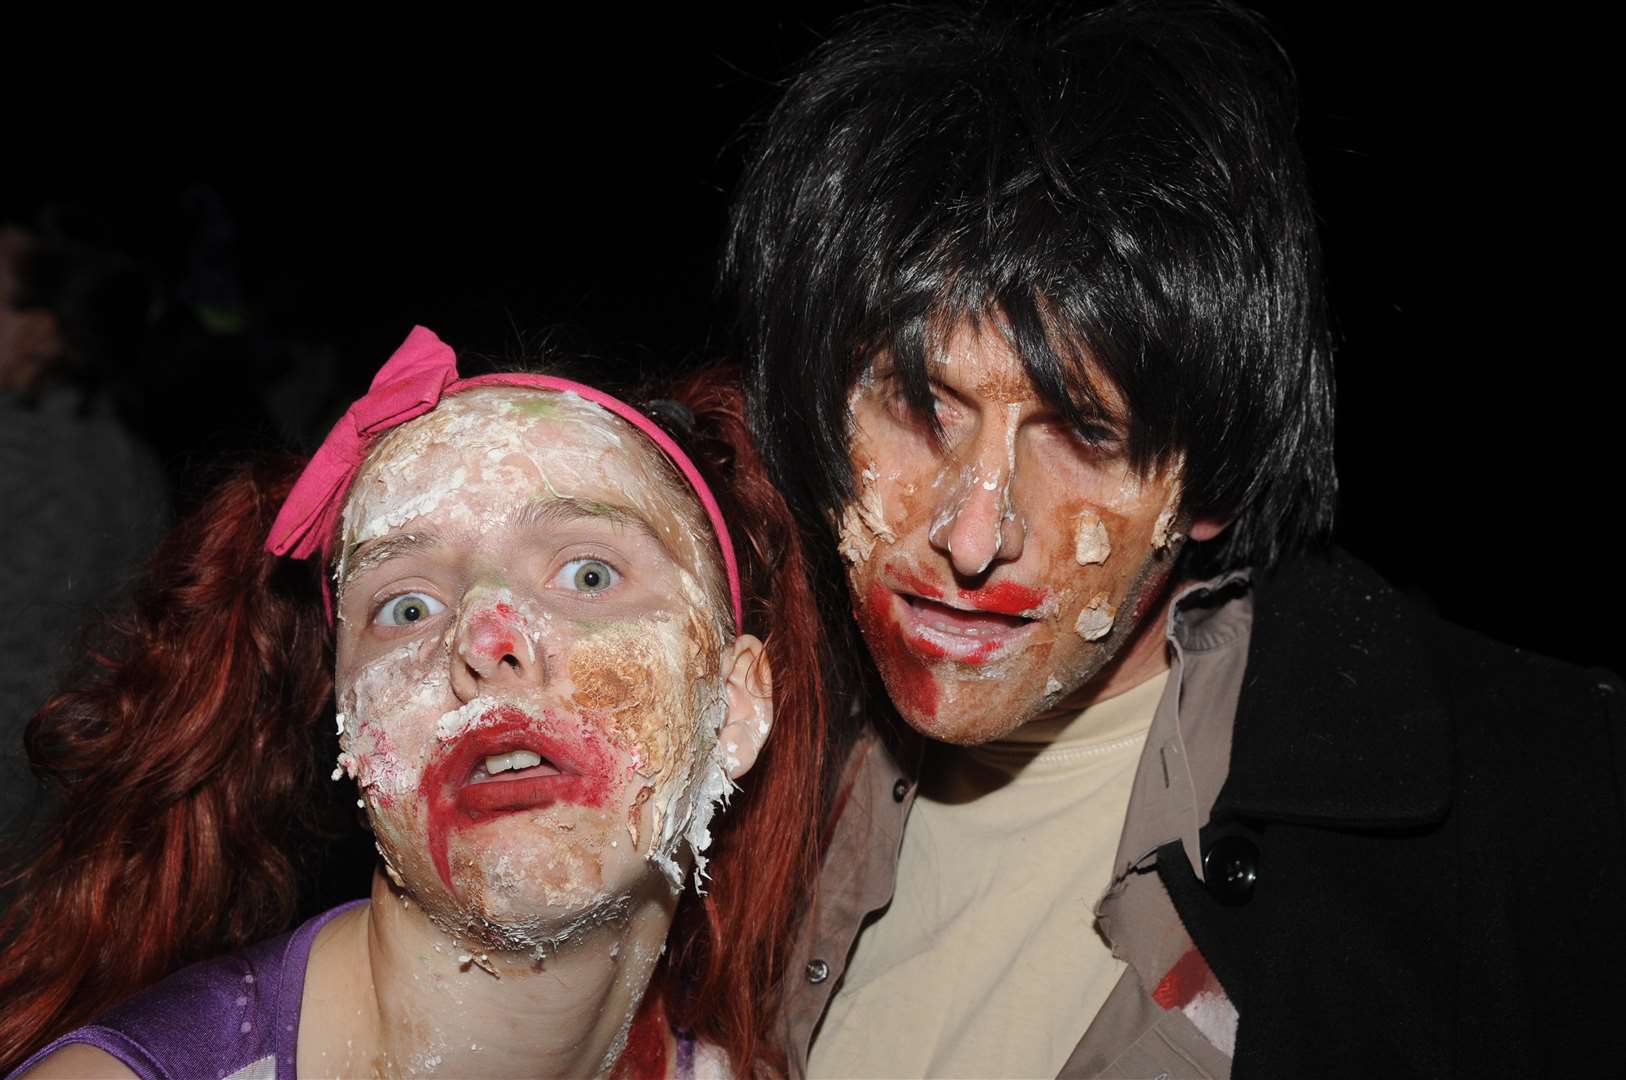 Niamh and Richard at the 2016 Zombie Crawl